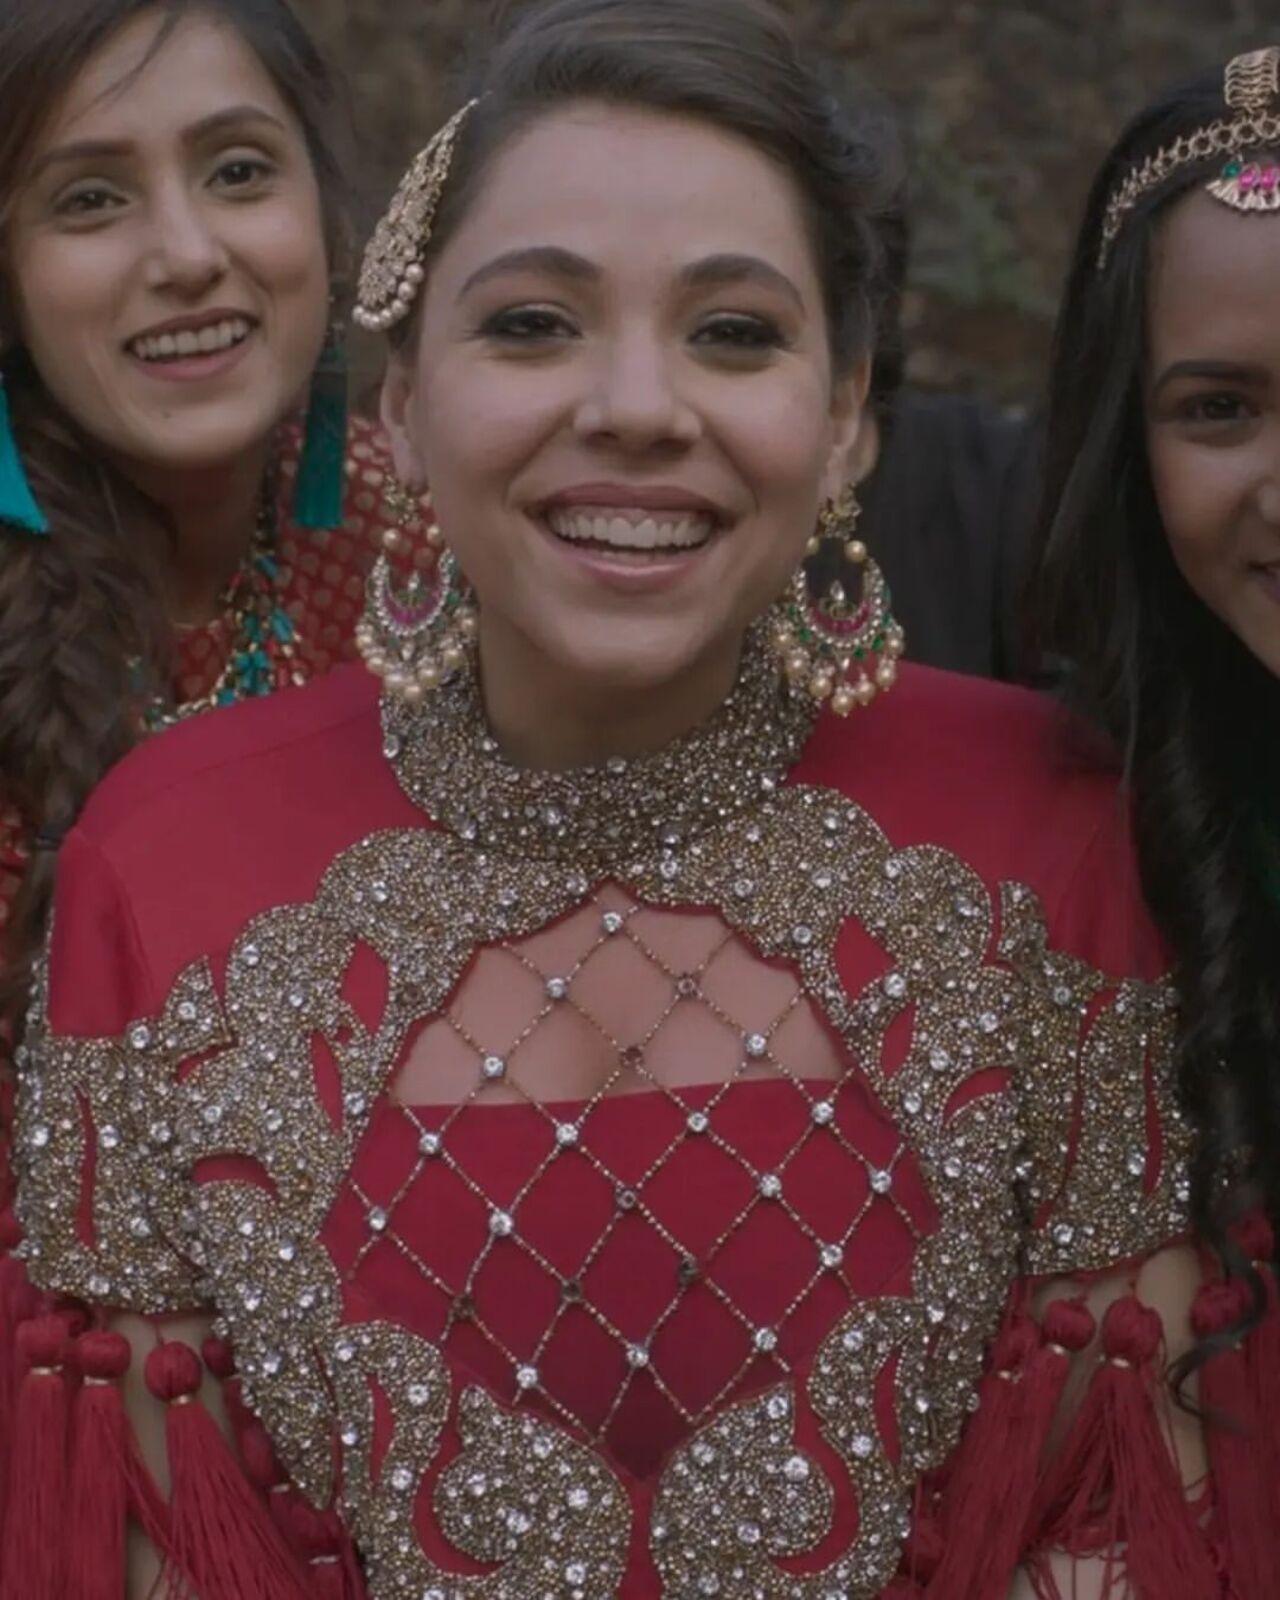 Bridezilla is back! Maanvi Gagaroo's character definitely wanted all the attention on her in the special bridal-themed music video she shot - and no wonder she chose to wear something flamboyant